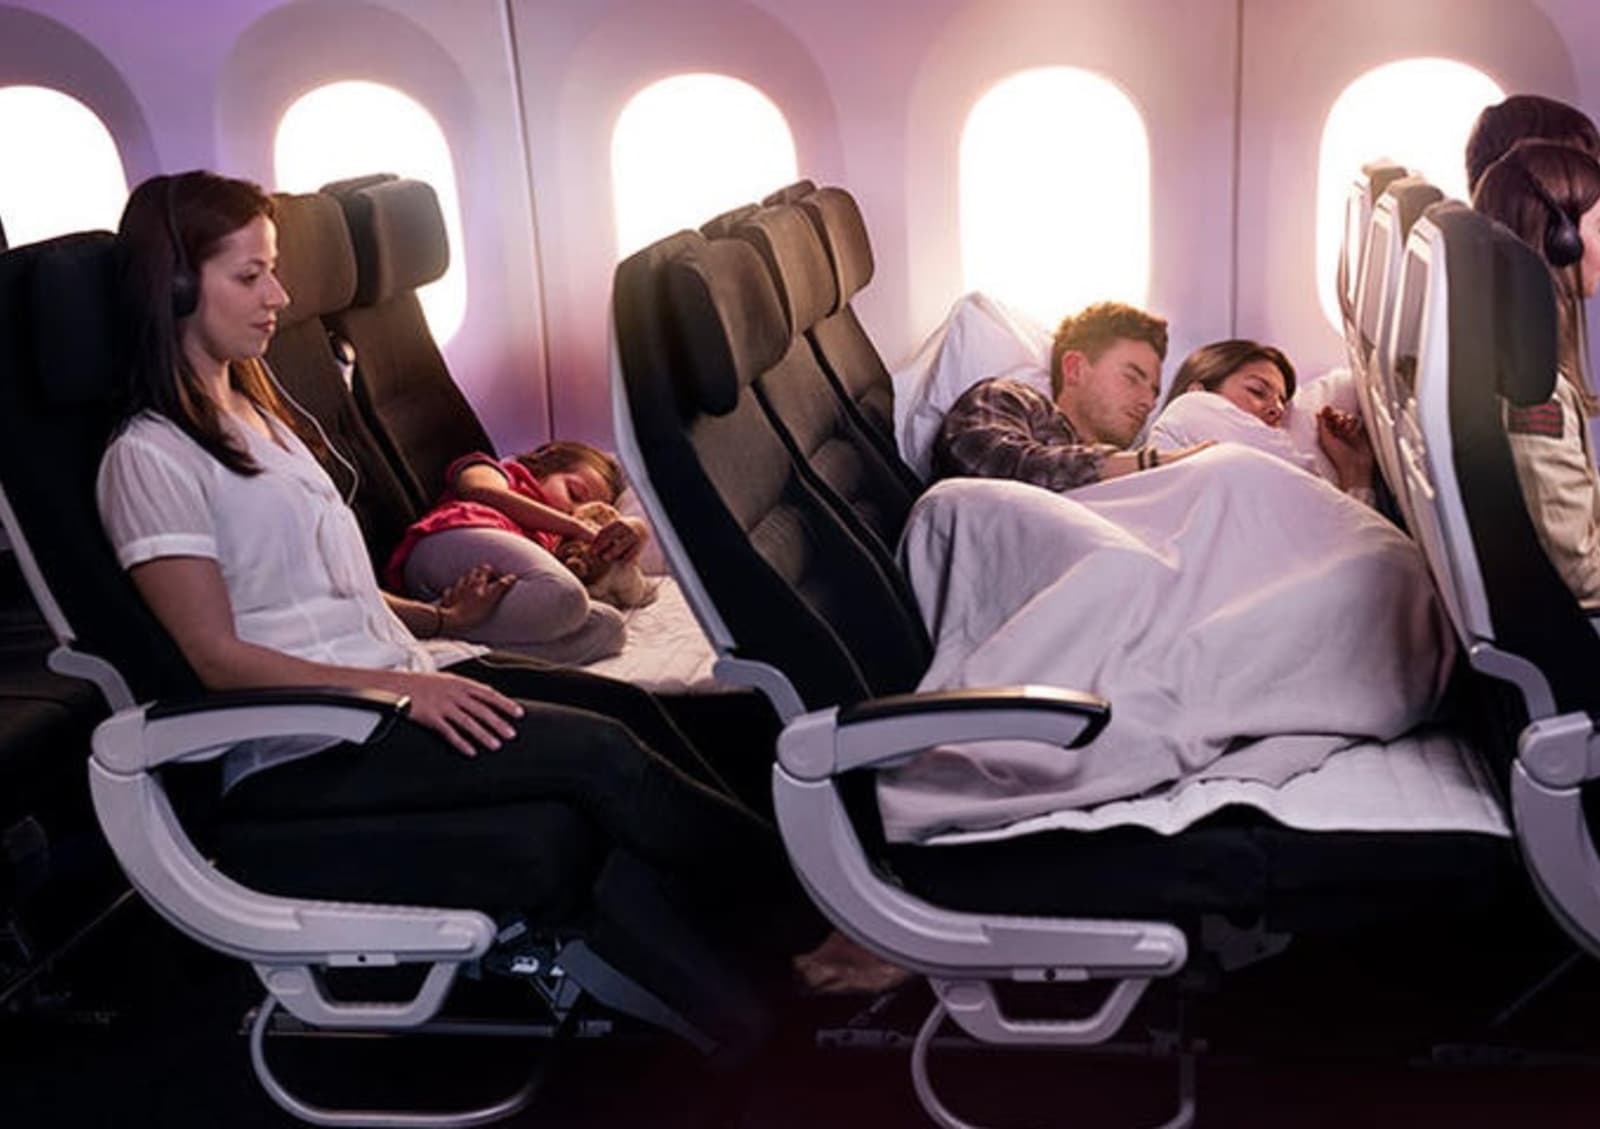 rs-two-economy-skycouches-family-two-and-couple-sleeping-0000604.jpg